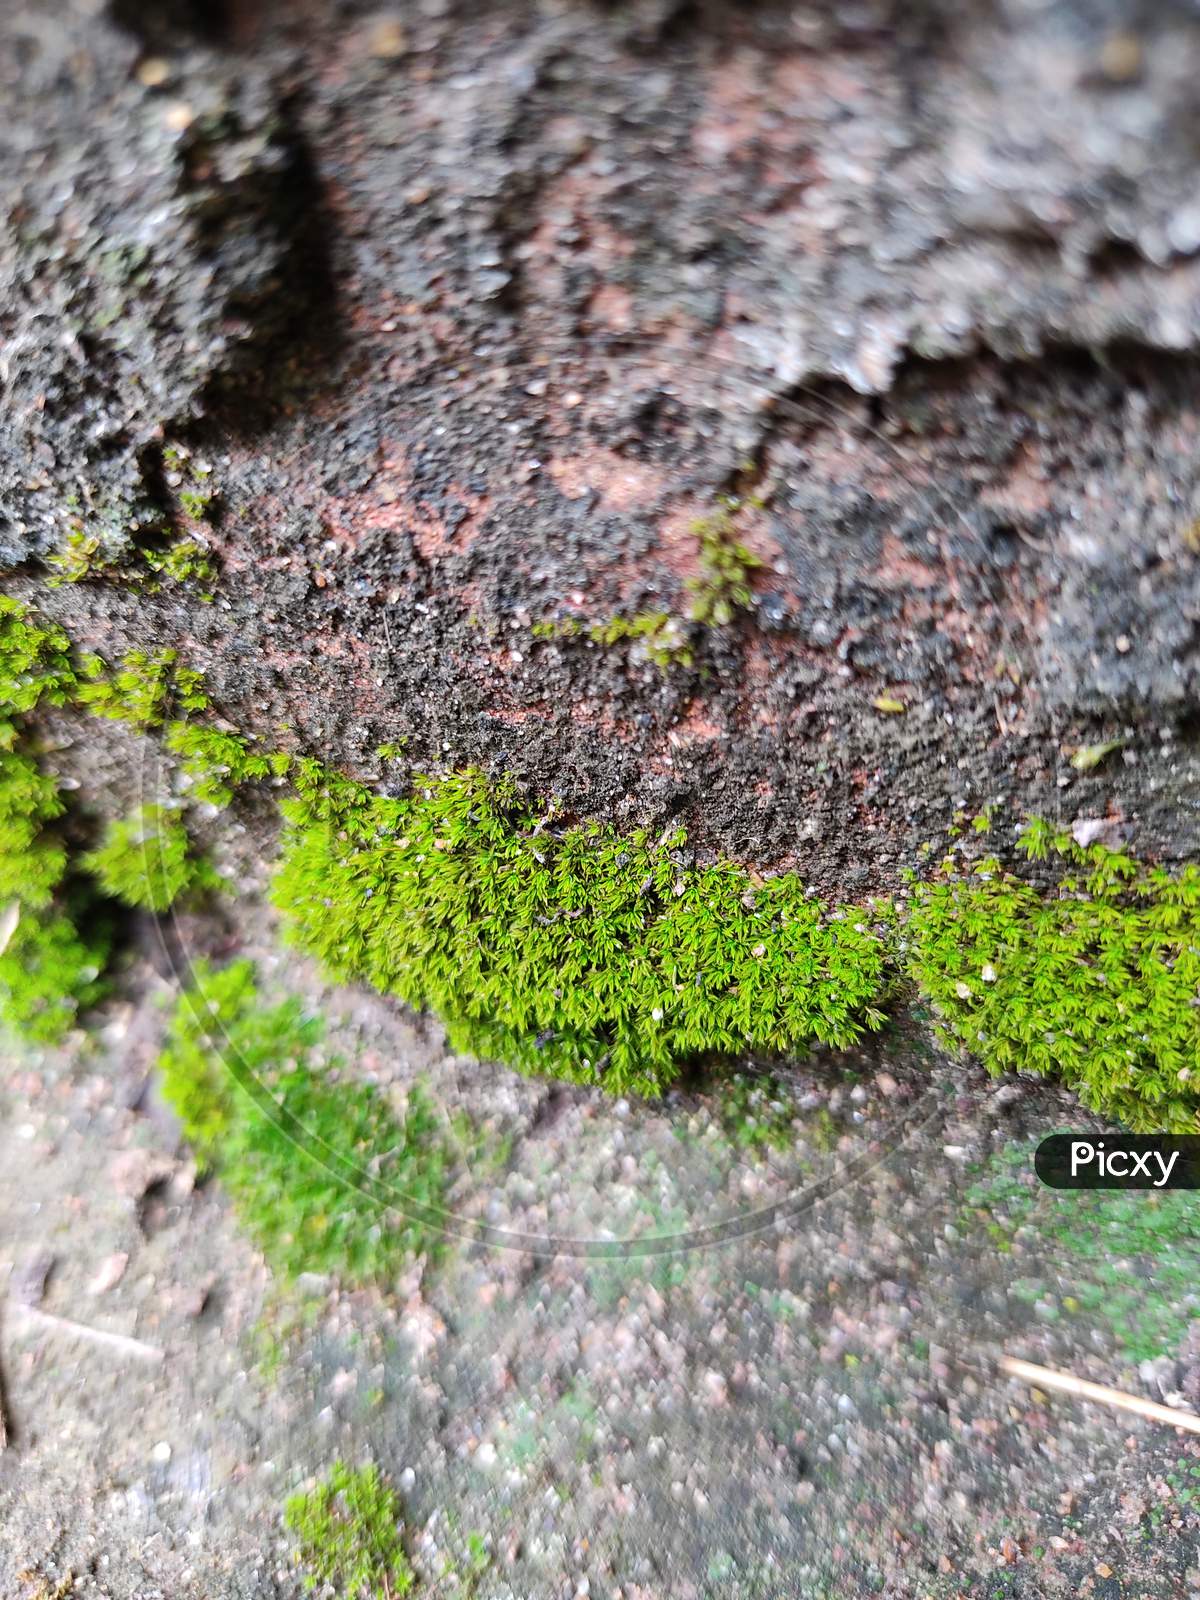 This Is Image Of  Entodon seductrix . Which is captured from Closeup . Green moss